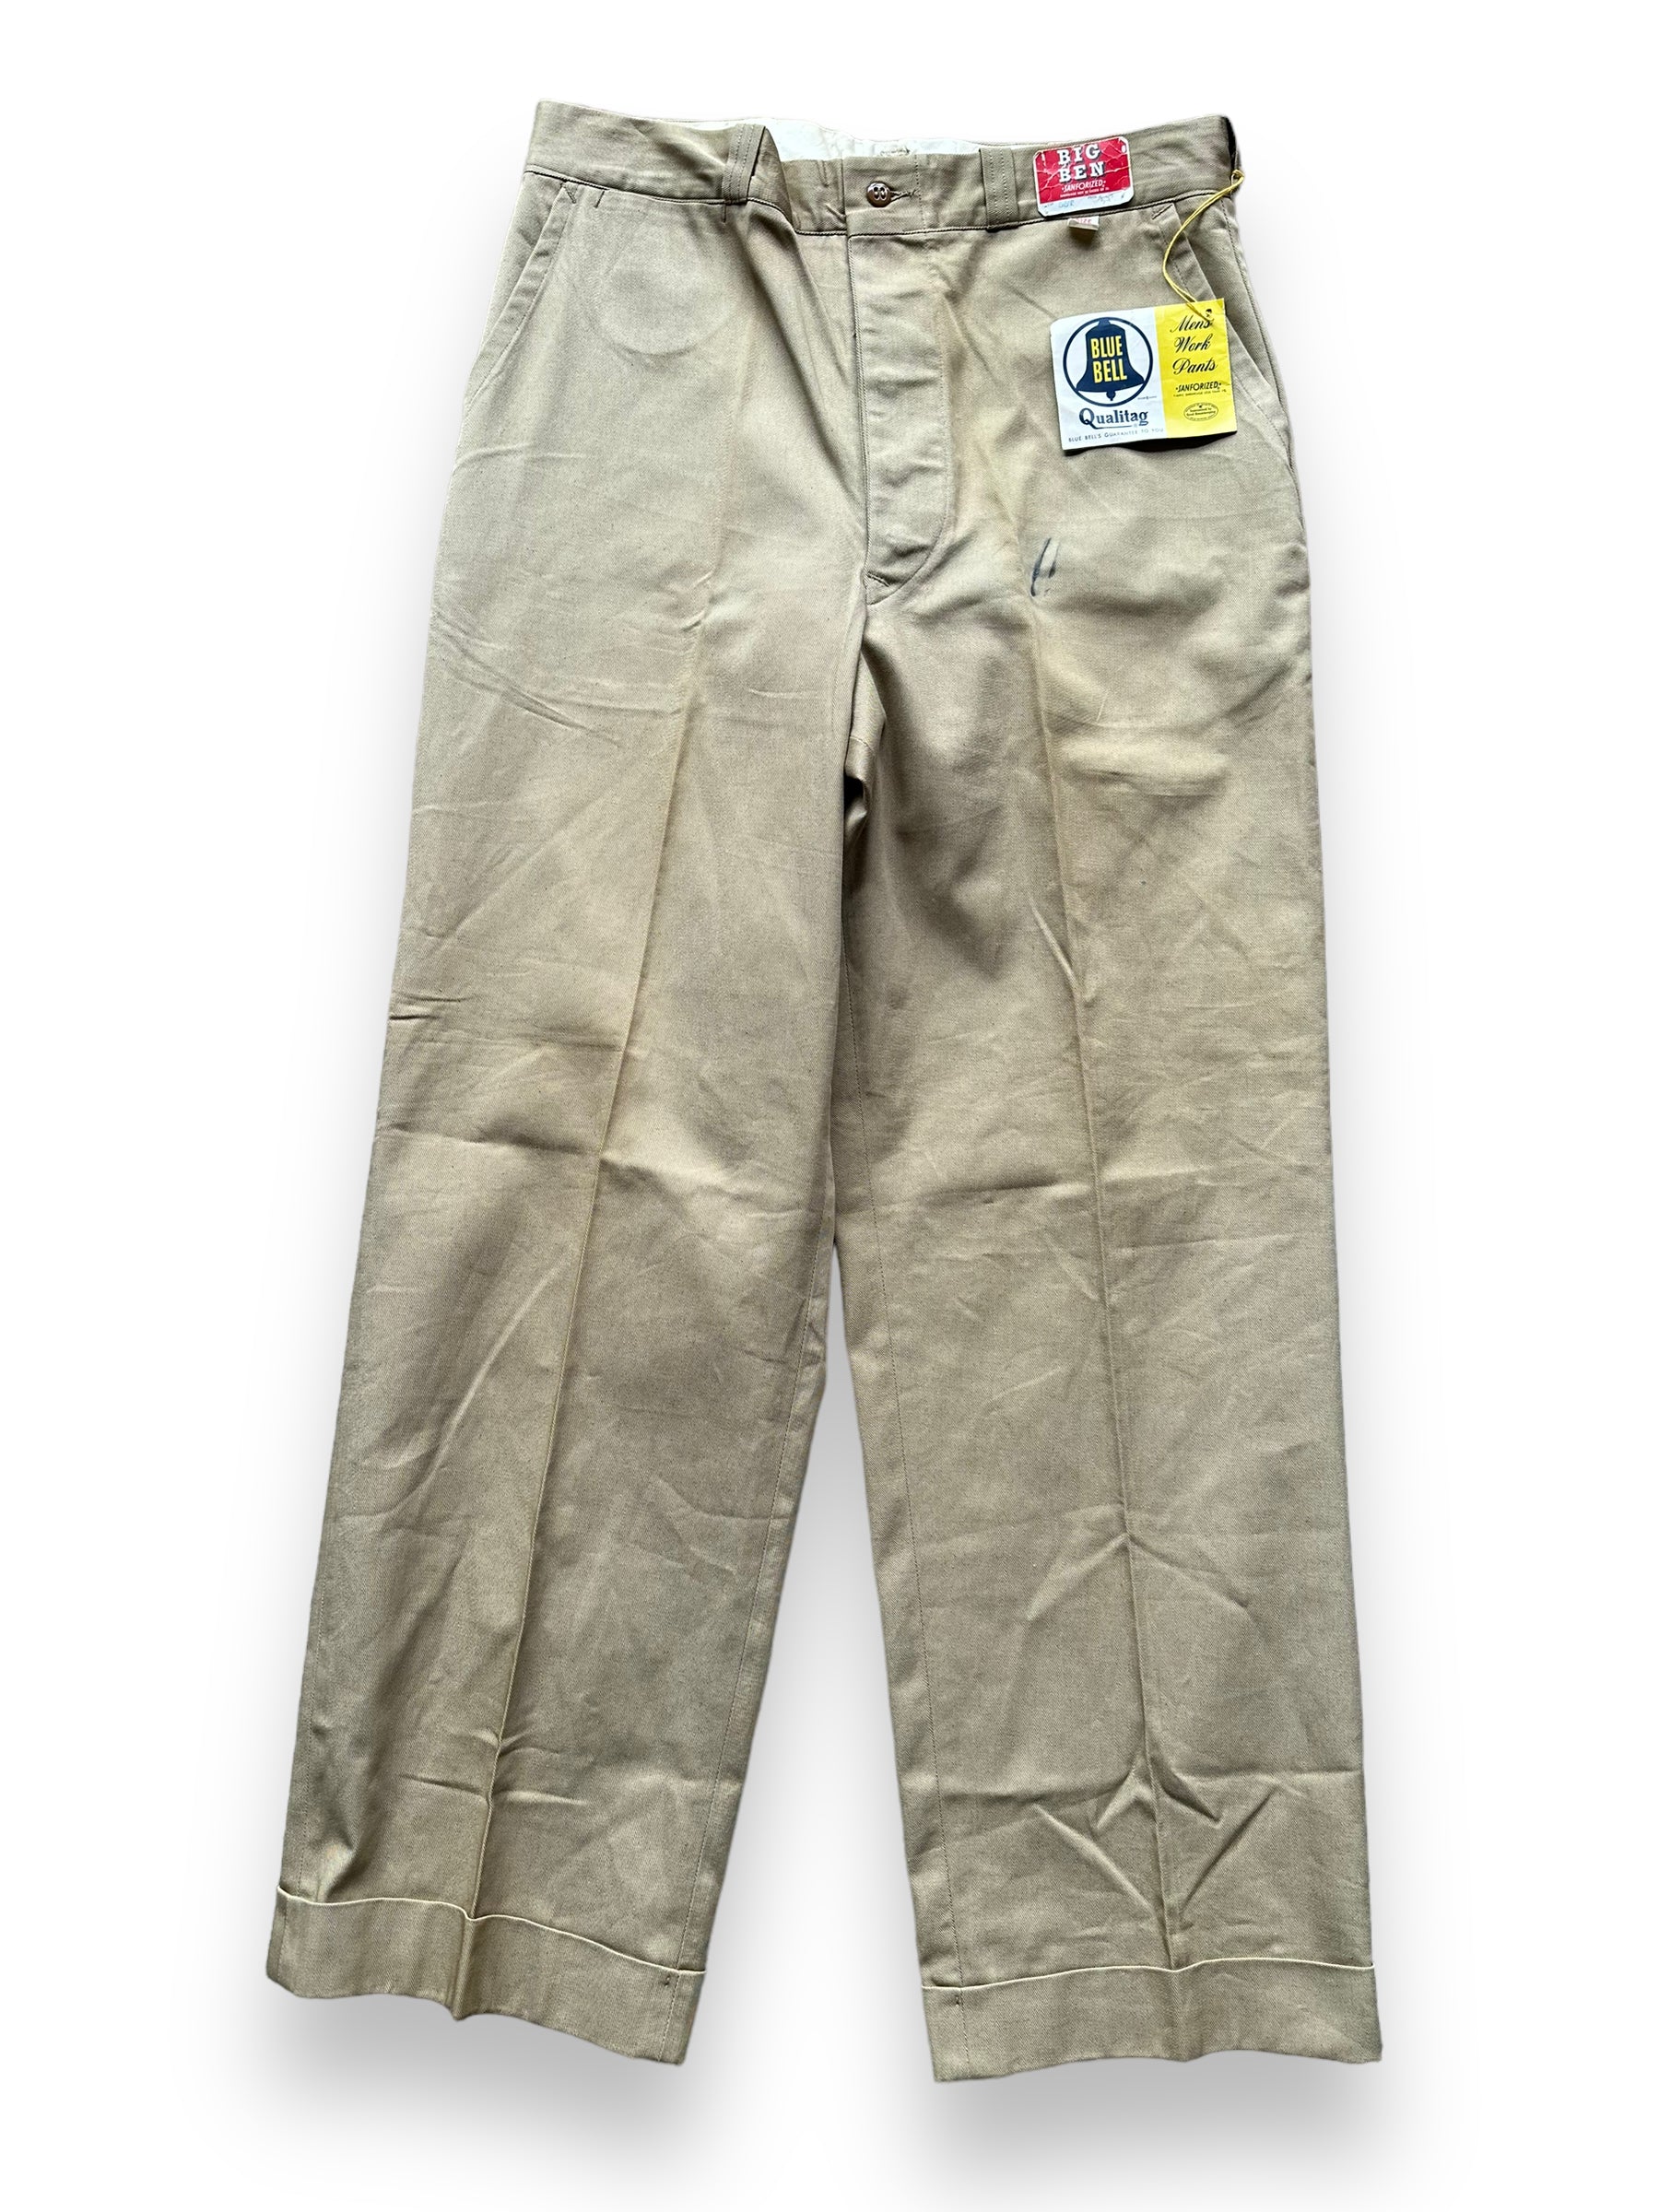 Front close up of Vintage Deadstock Big Ben Military Chinos 32 x 30 | Barn Owl Vintage Seattle | Vintage Military Seattle